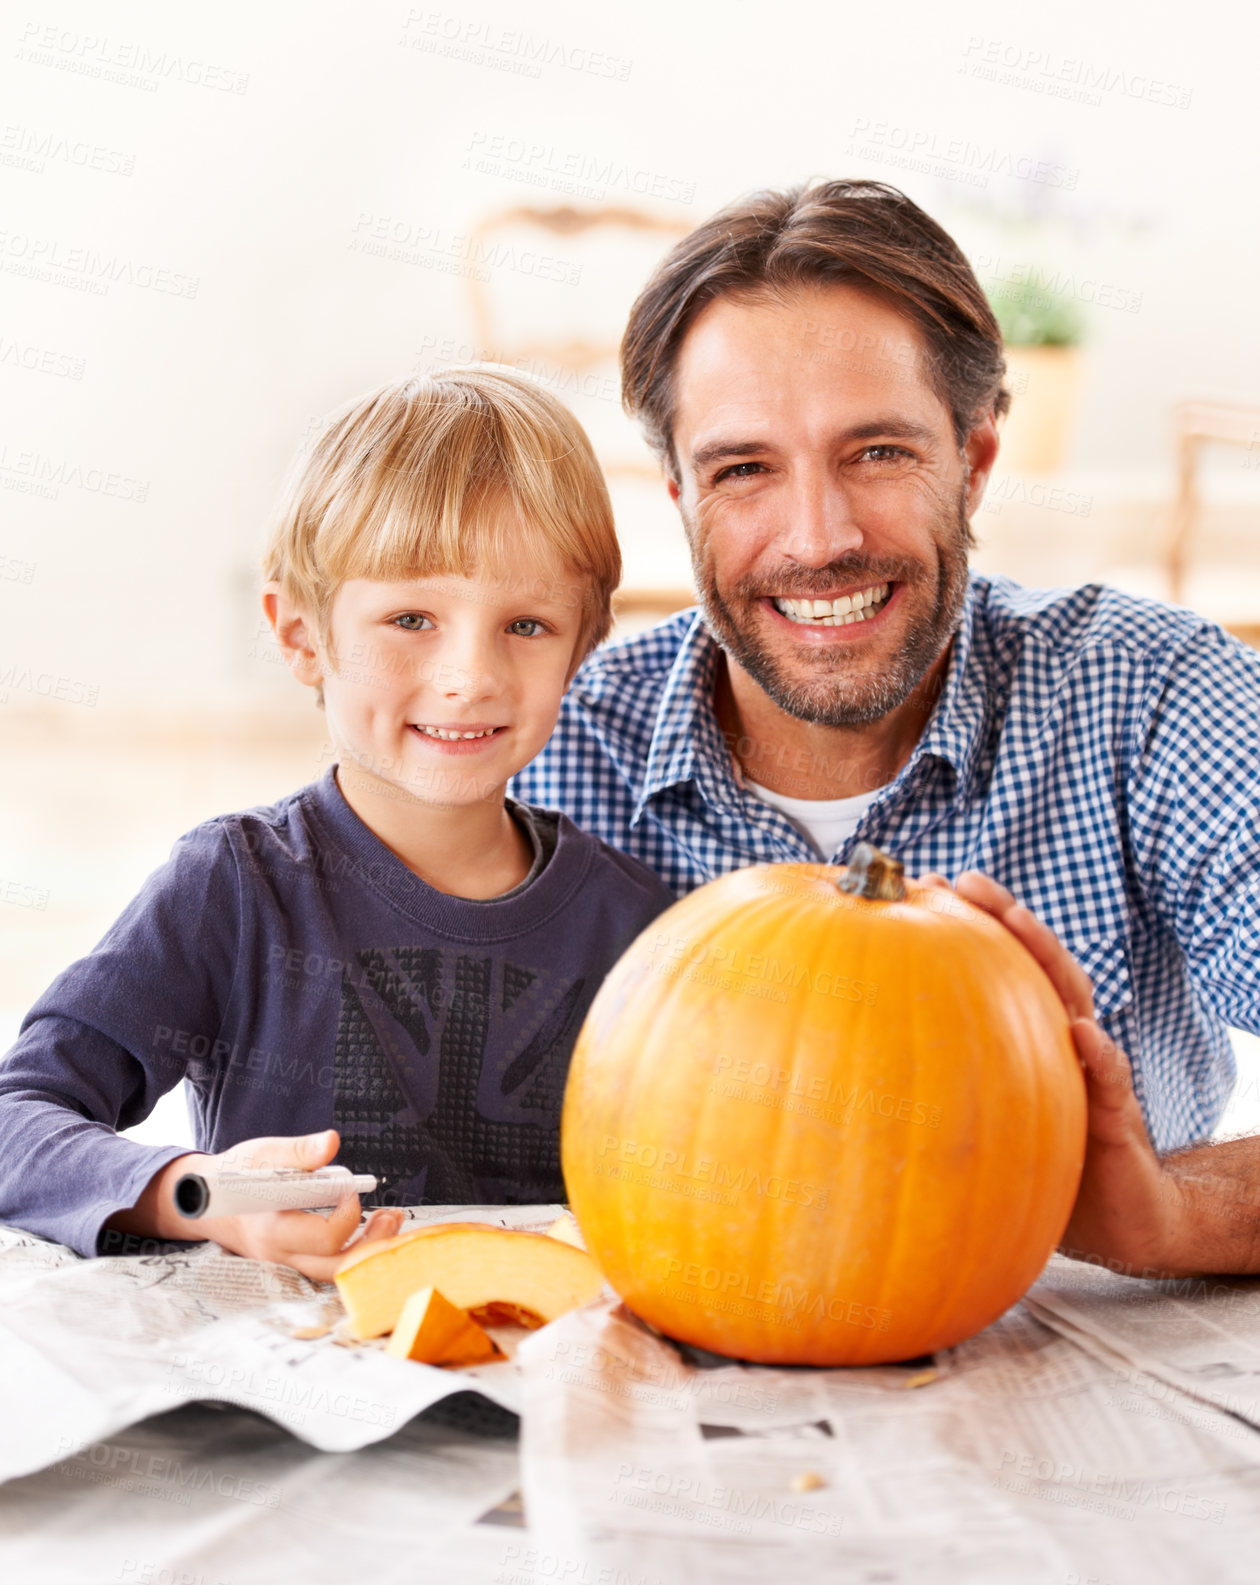 Buy stock photo Portrait of a father and son carving a pumpkin in the kitchen for halloween